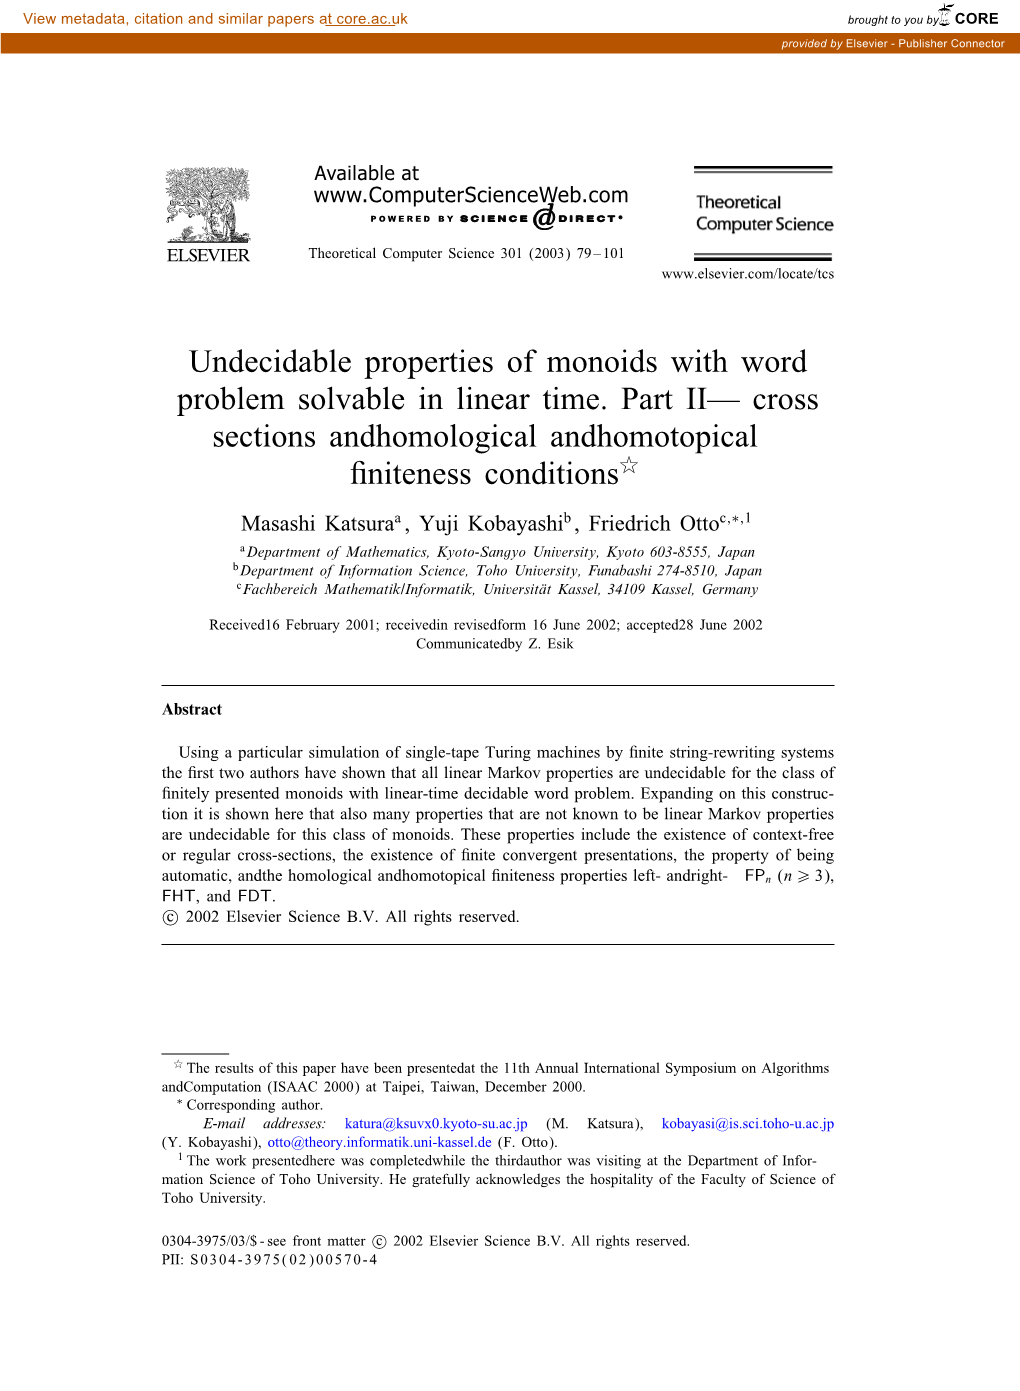 Undecidable Properties of Monoids with Word Problem Solvable in Linear Time